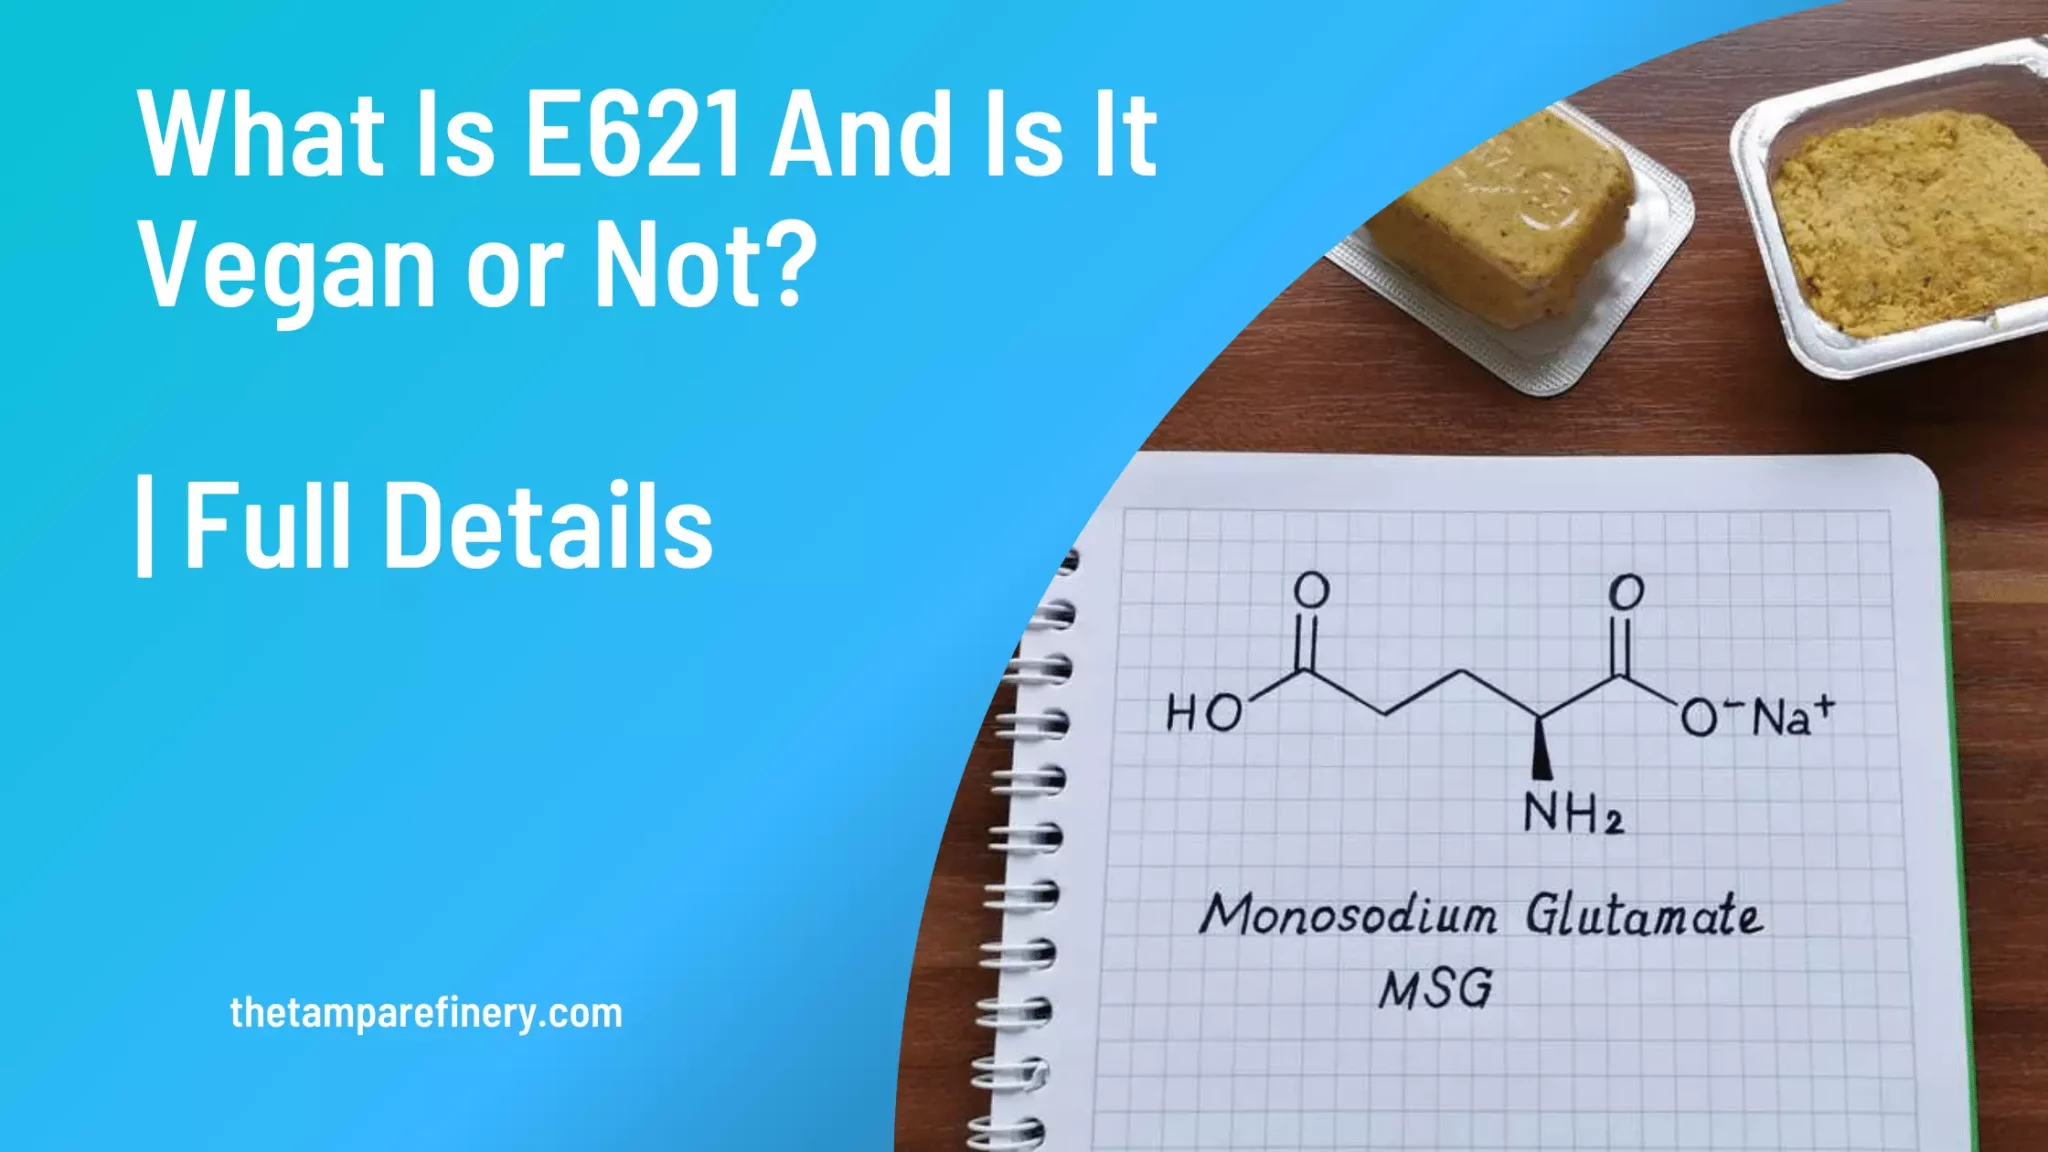 What Is E621 And Is It Vegan or Not